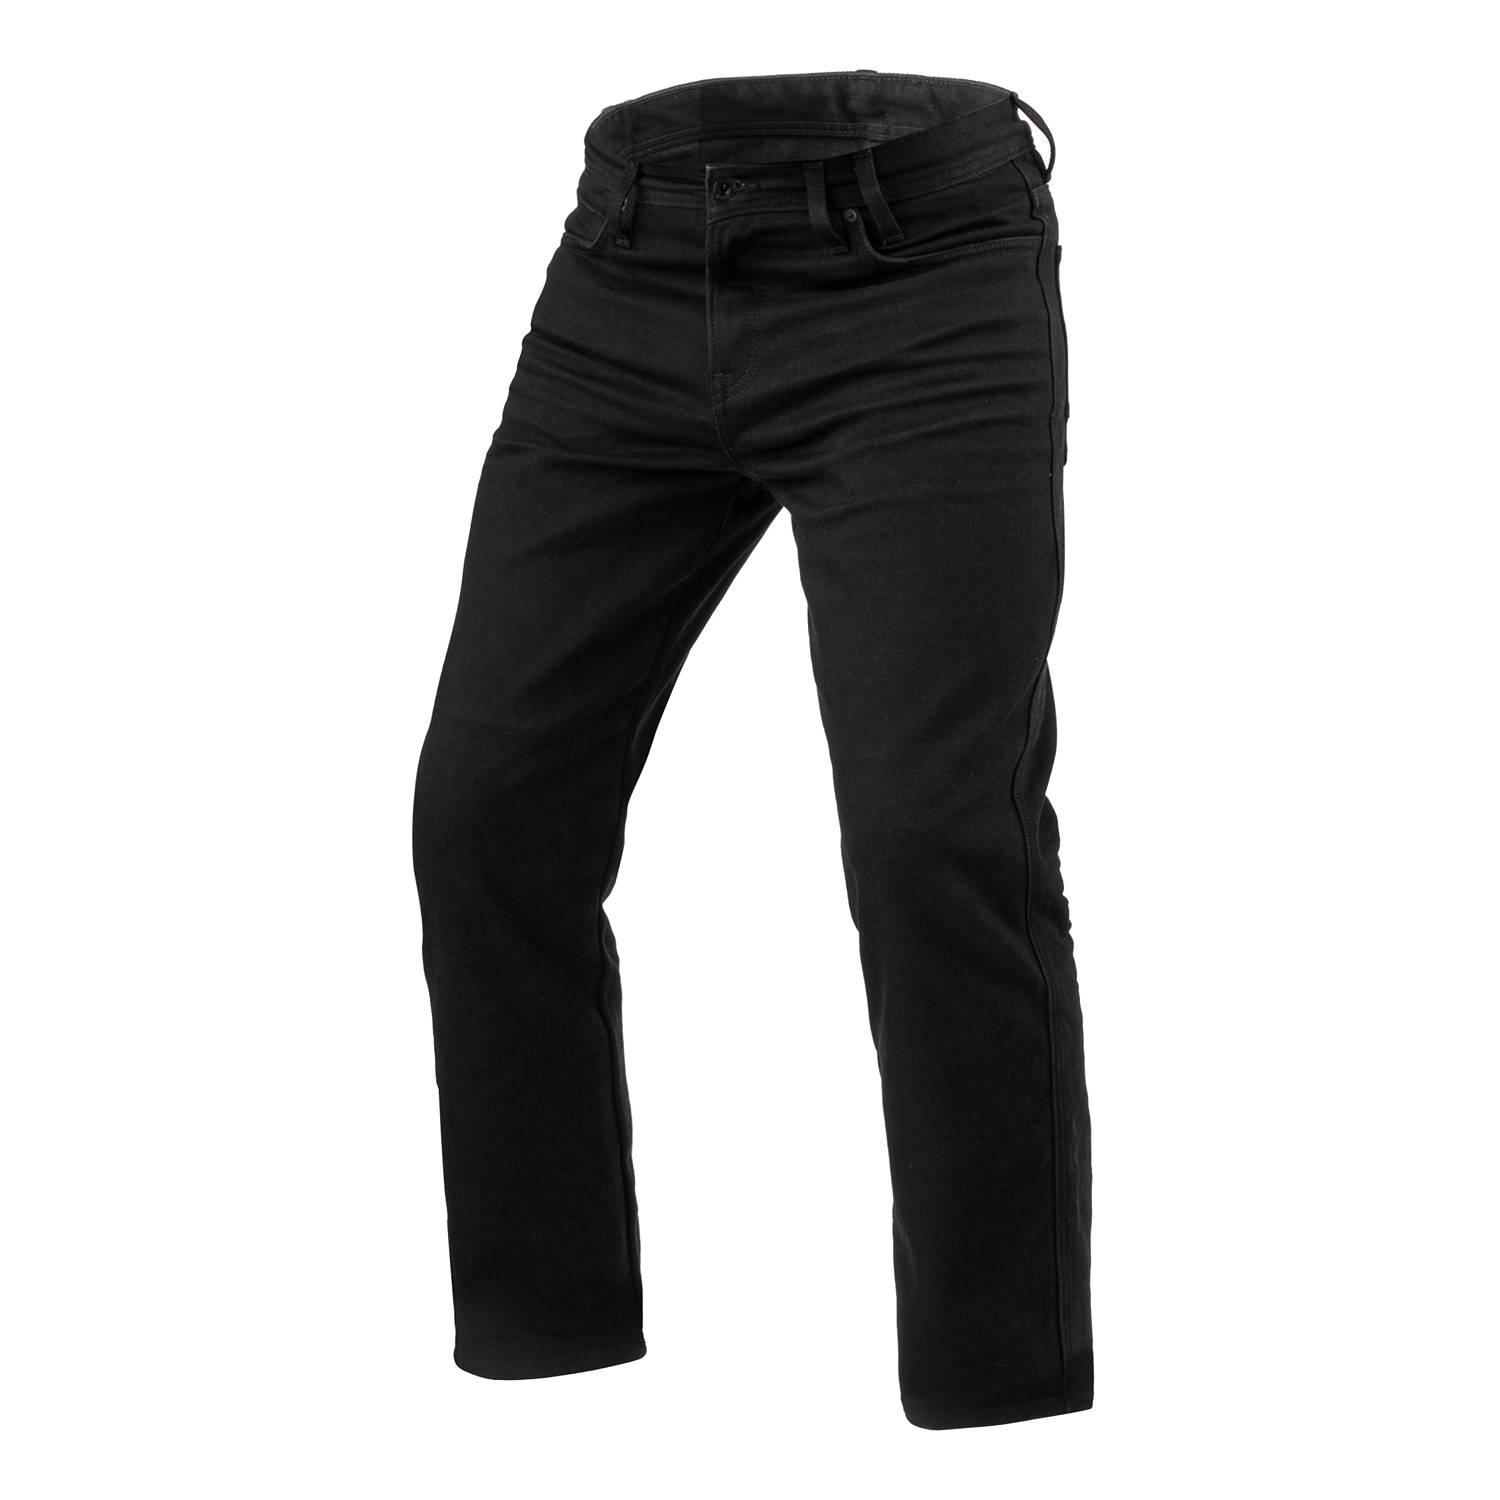 Image of REV'IT! Jeans Lombard 3 RF Black L34 Motorcycle Jeans Size L34/W28 ID 8700001375719